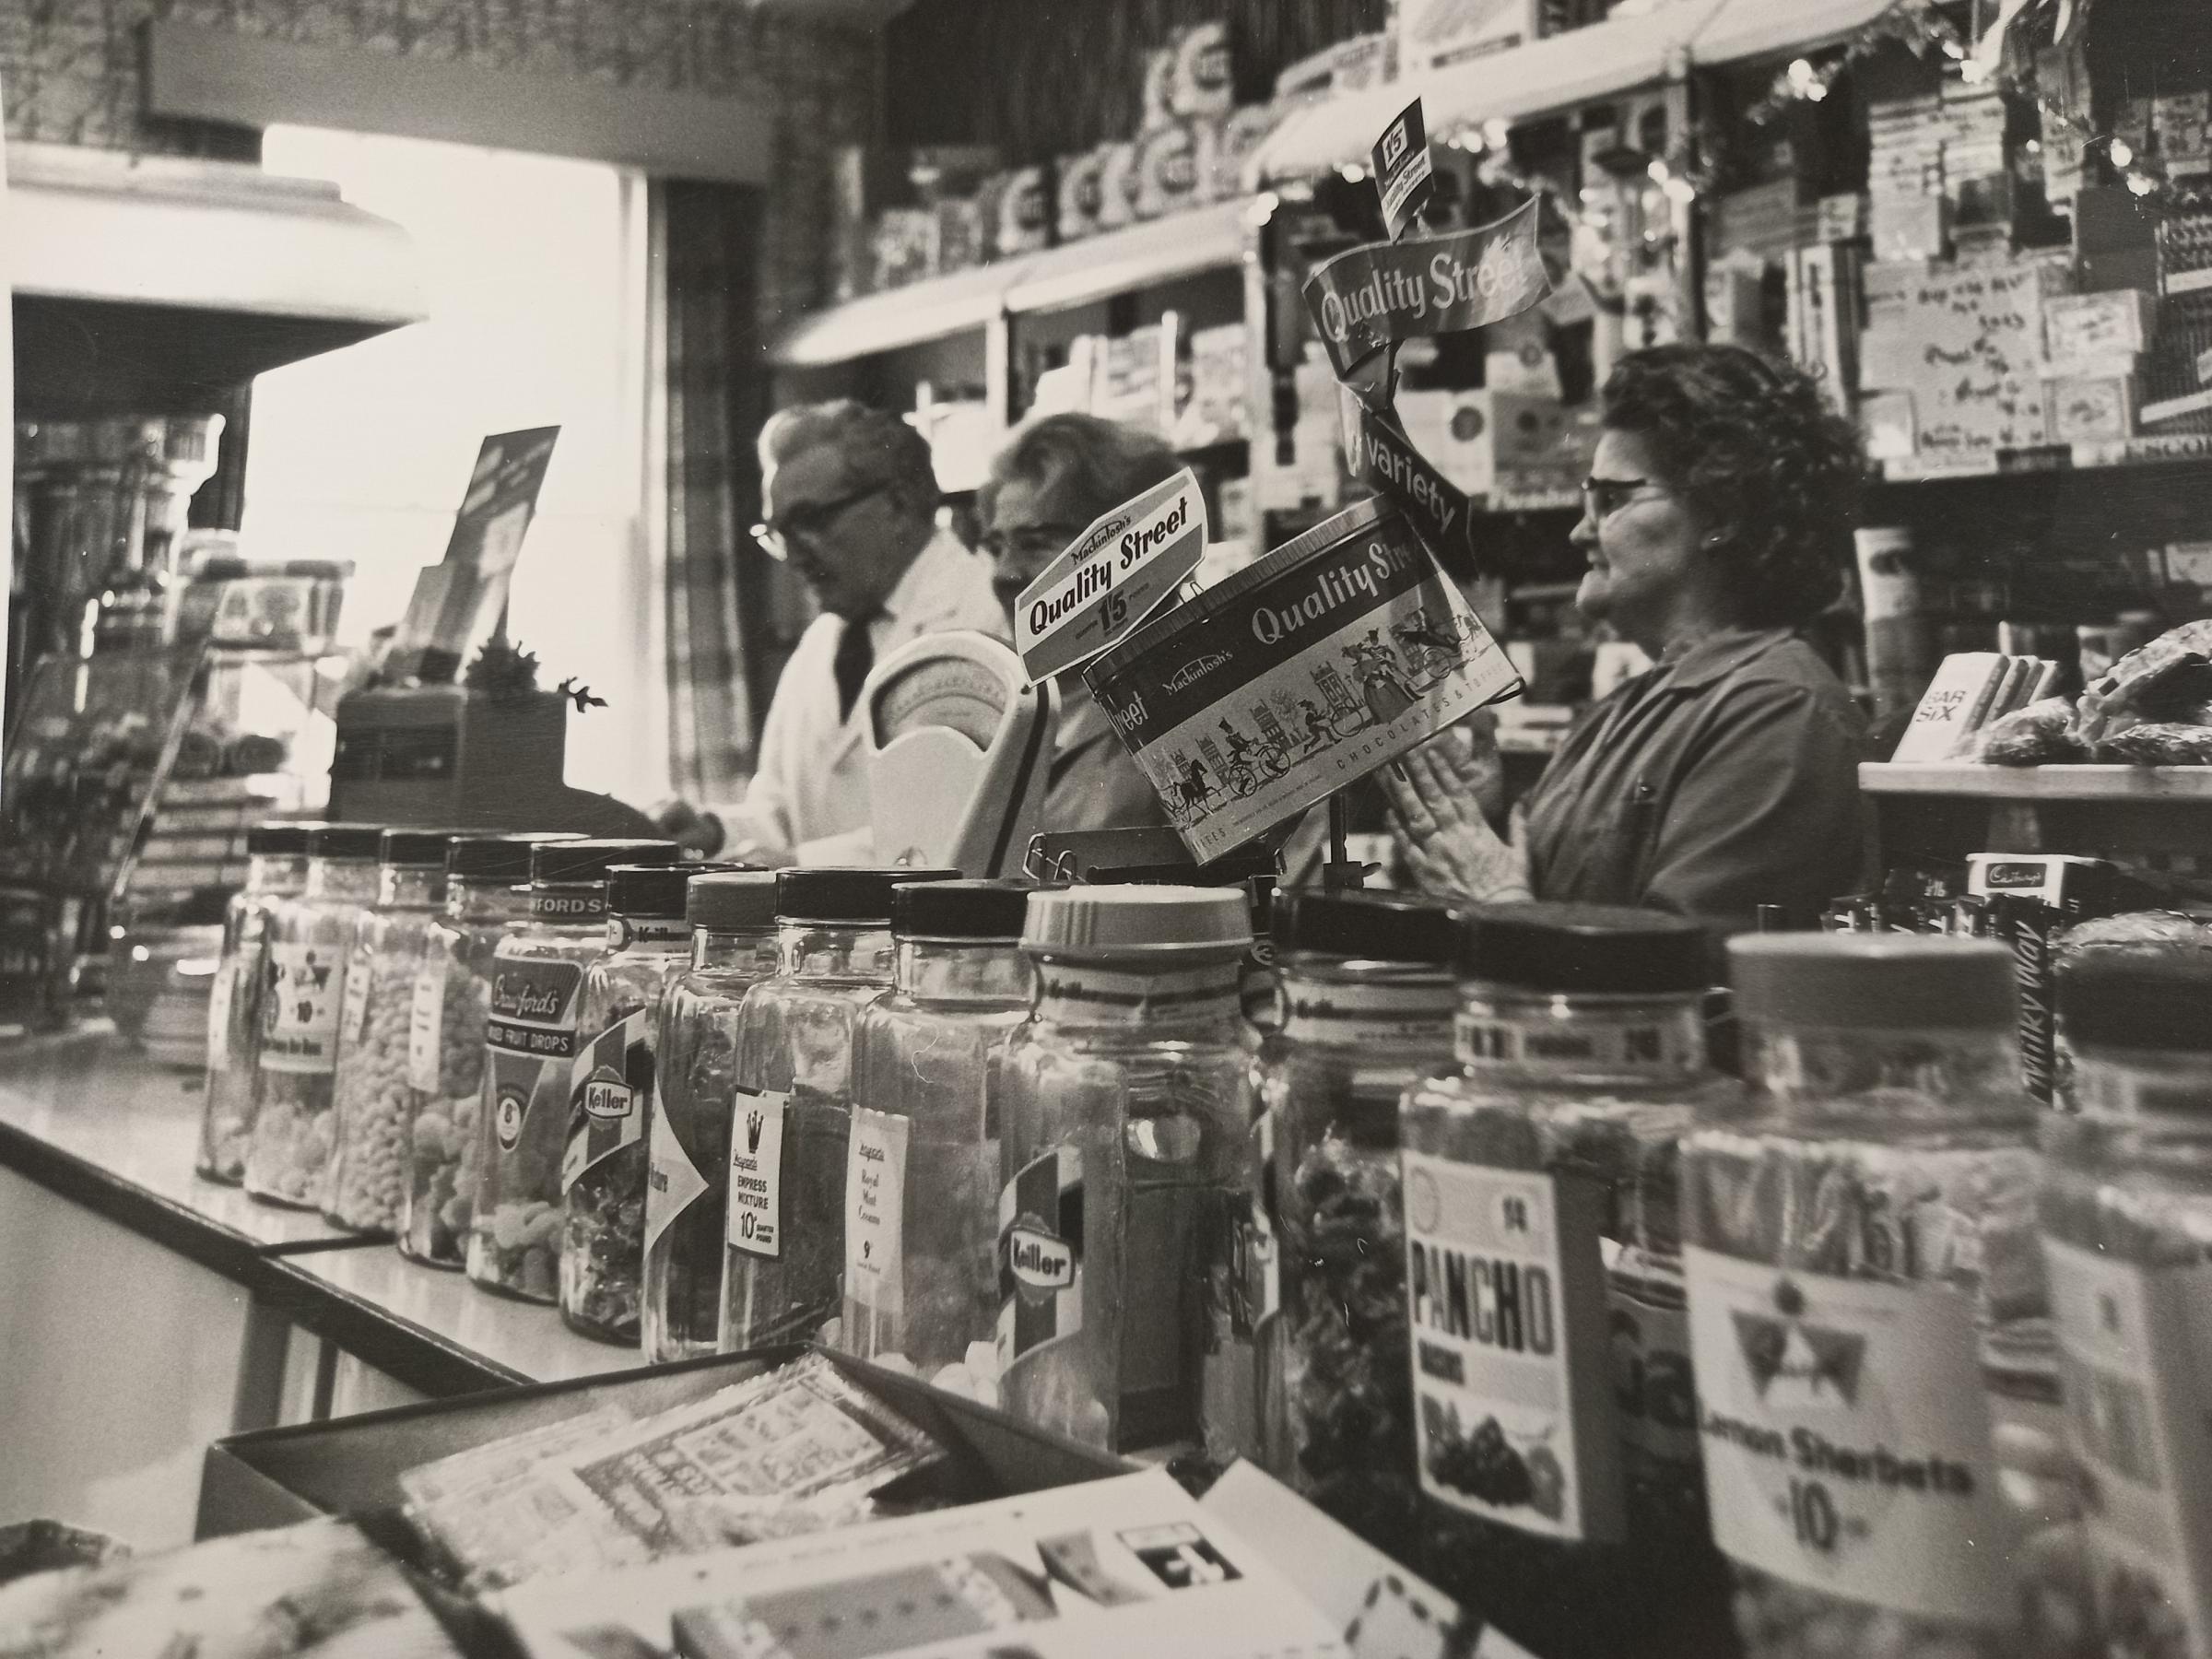 The Severalls Hospital sweet shop pictured in 1960